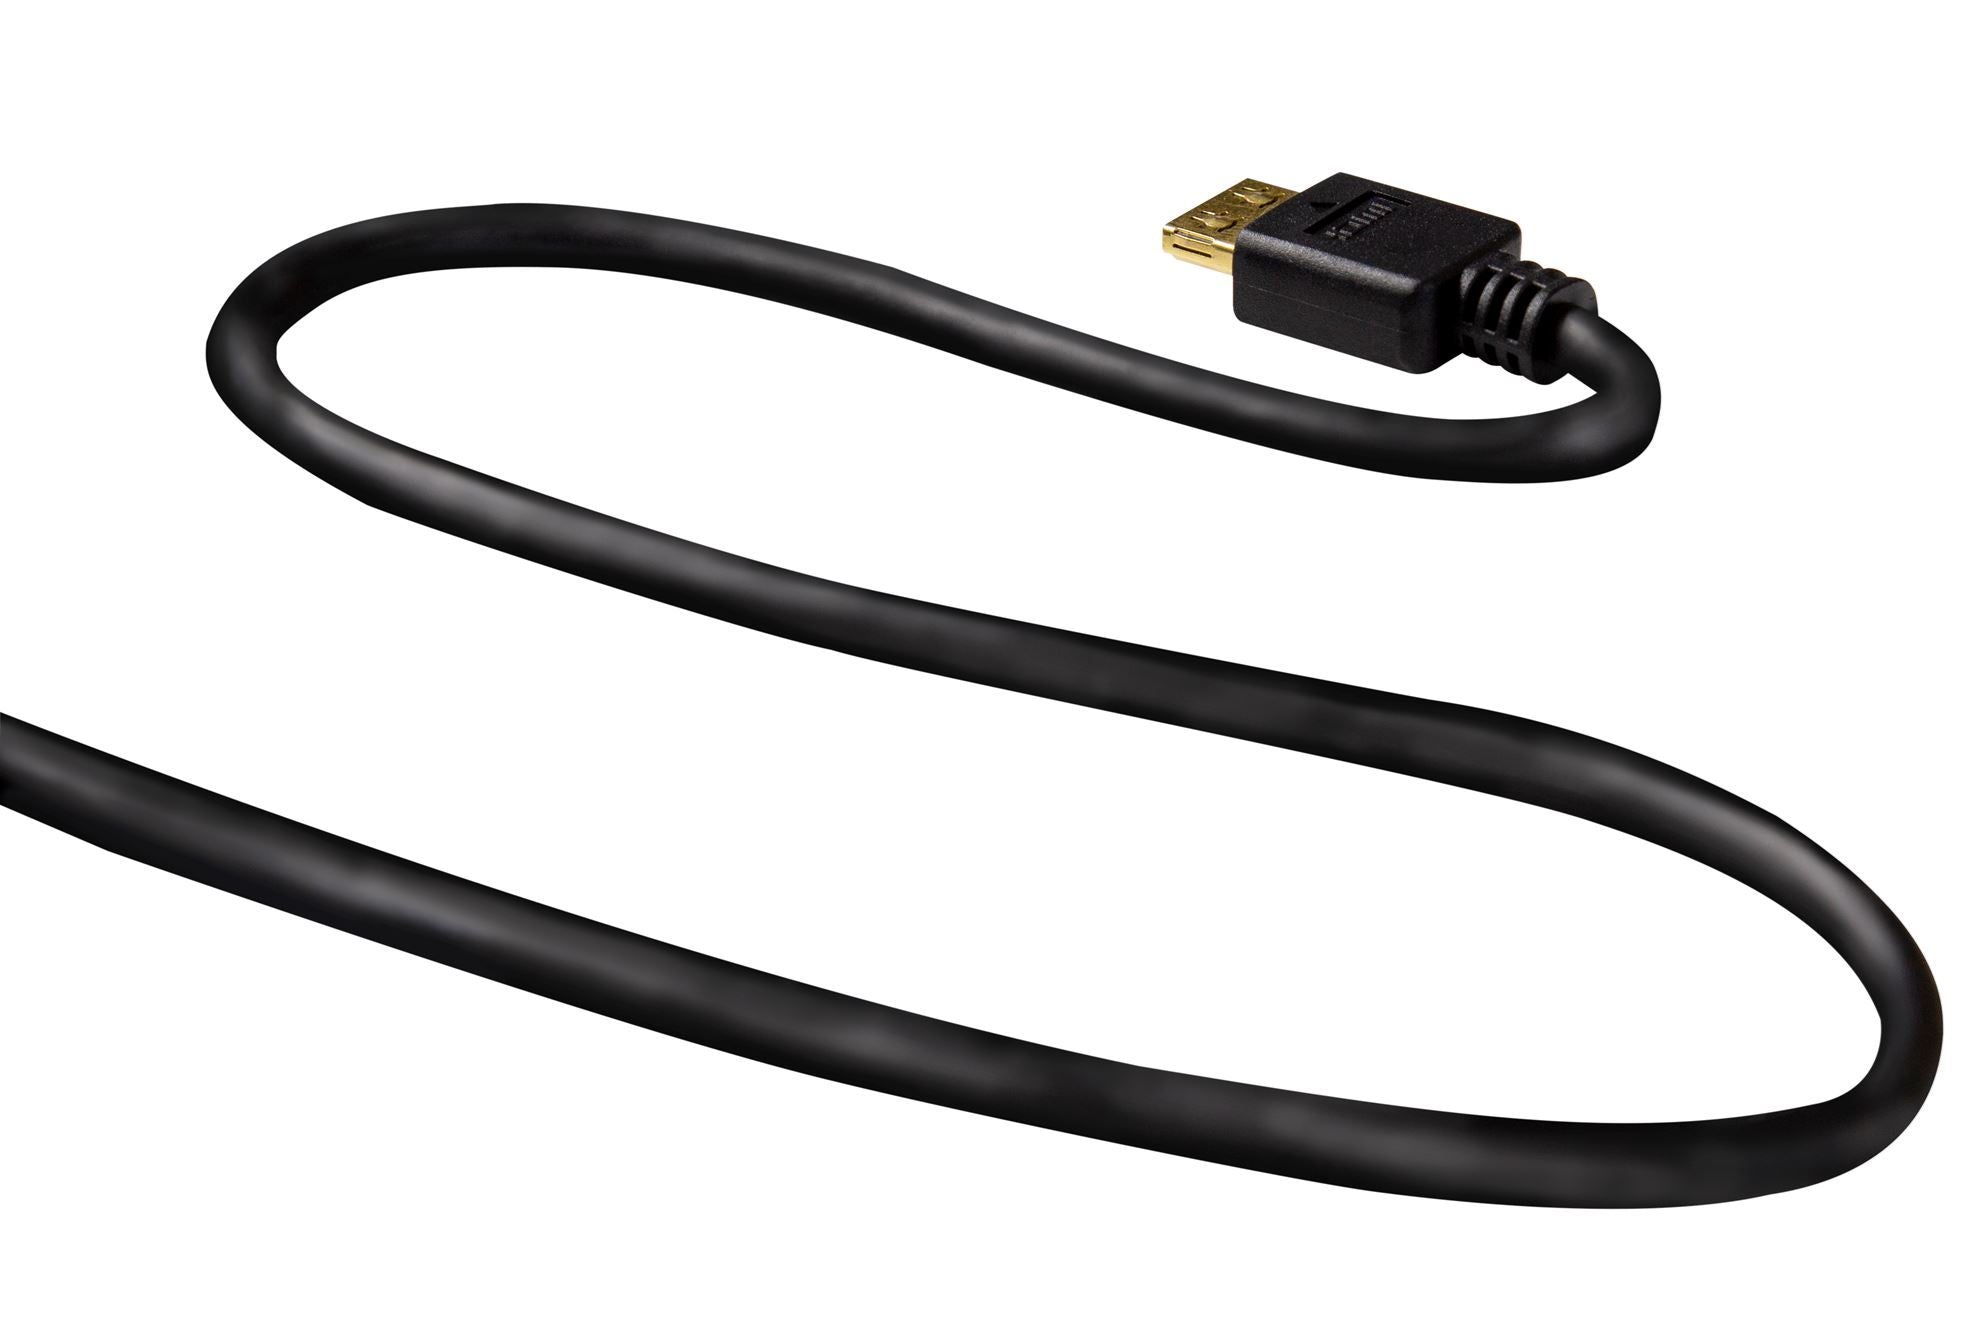 DYNAMIX_4m_HDMI_High_Speed_18Gbps_Flexi_Lock_Cable_with_Ethernet._Max_Res:_4K2K@30/60Hz._32_Audio_channels._10/12bit_colour_depth._Supports_CEC_2.0,_3D,_ARC,_Ethernet_2x_simultaneous_video_streams. 741